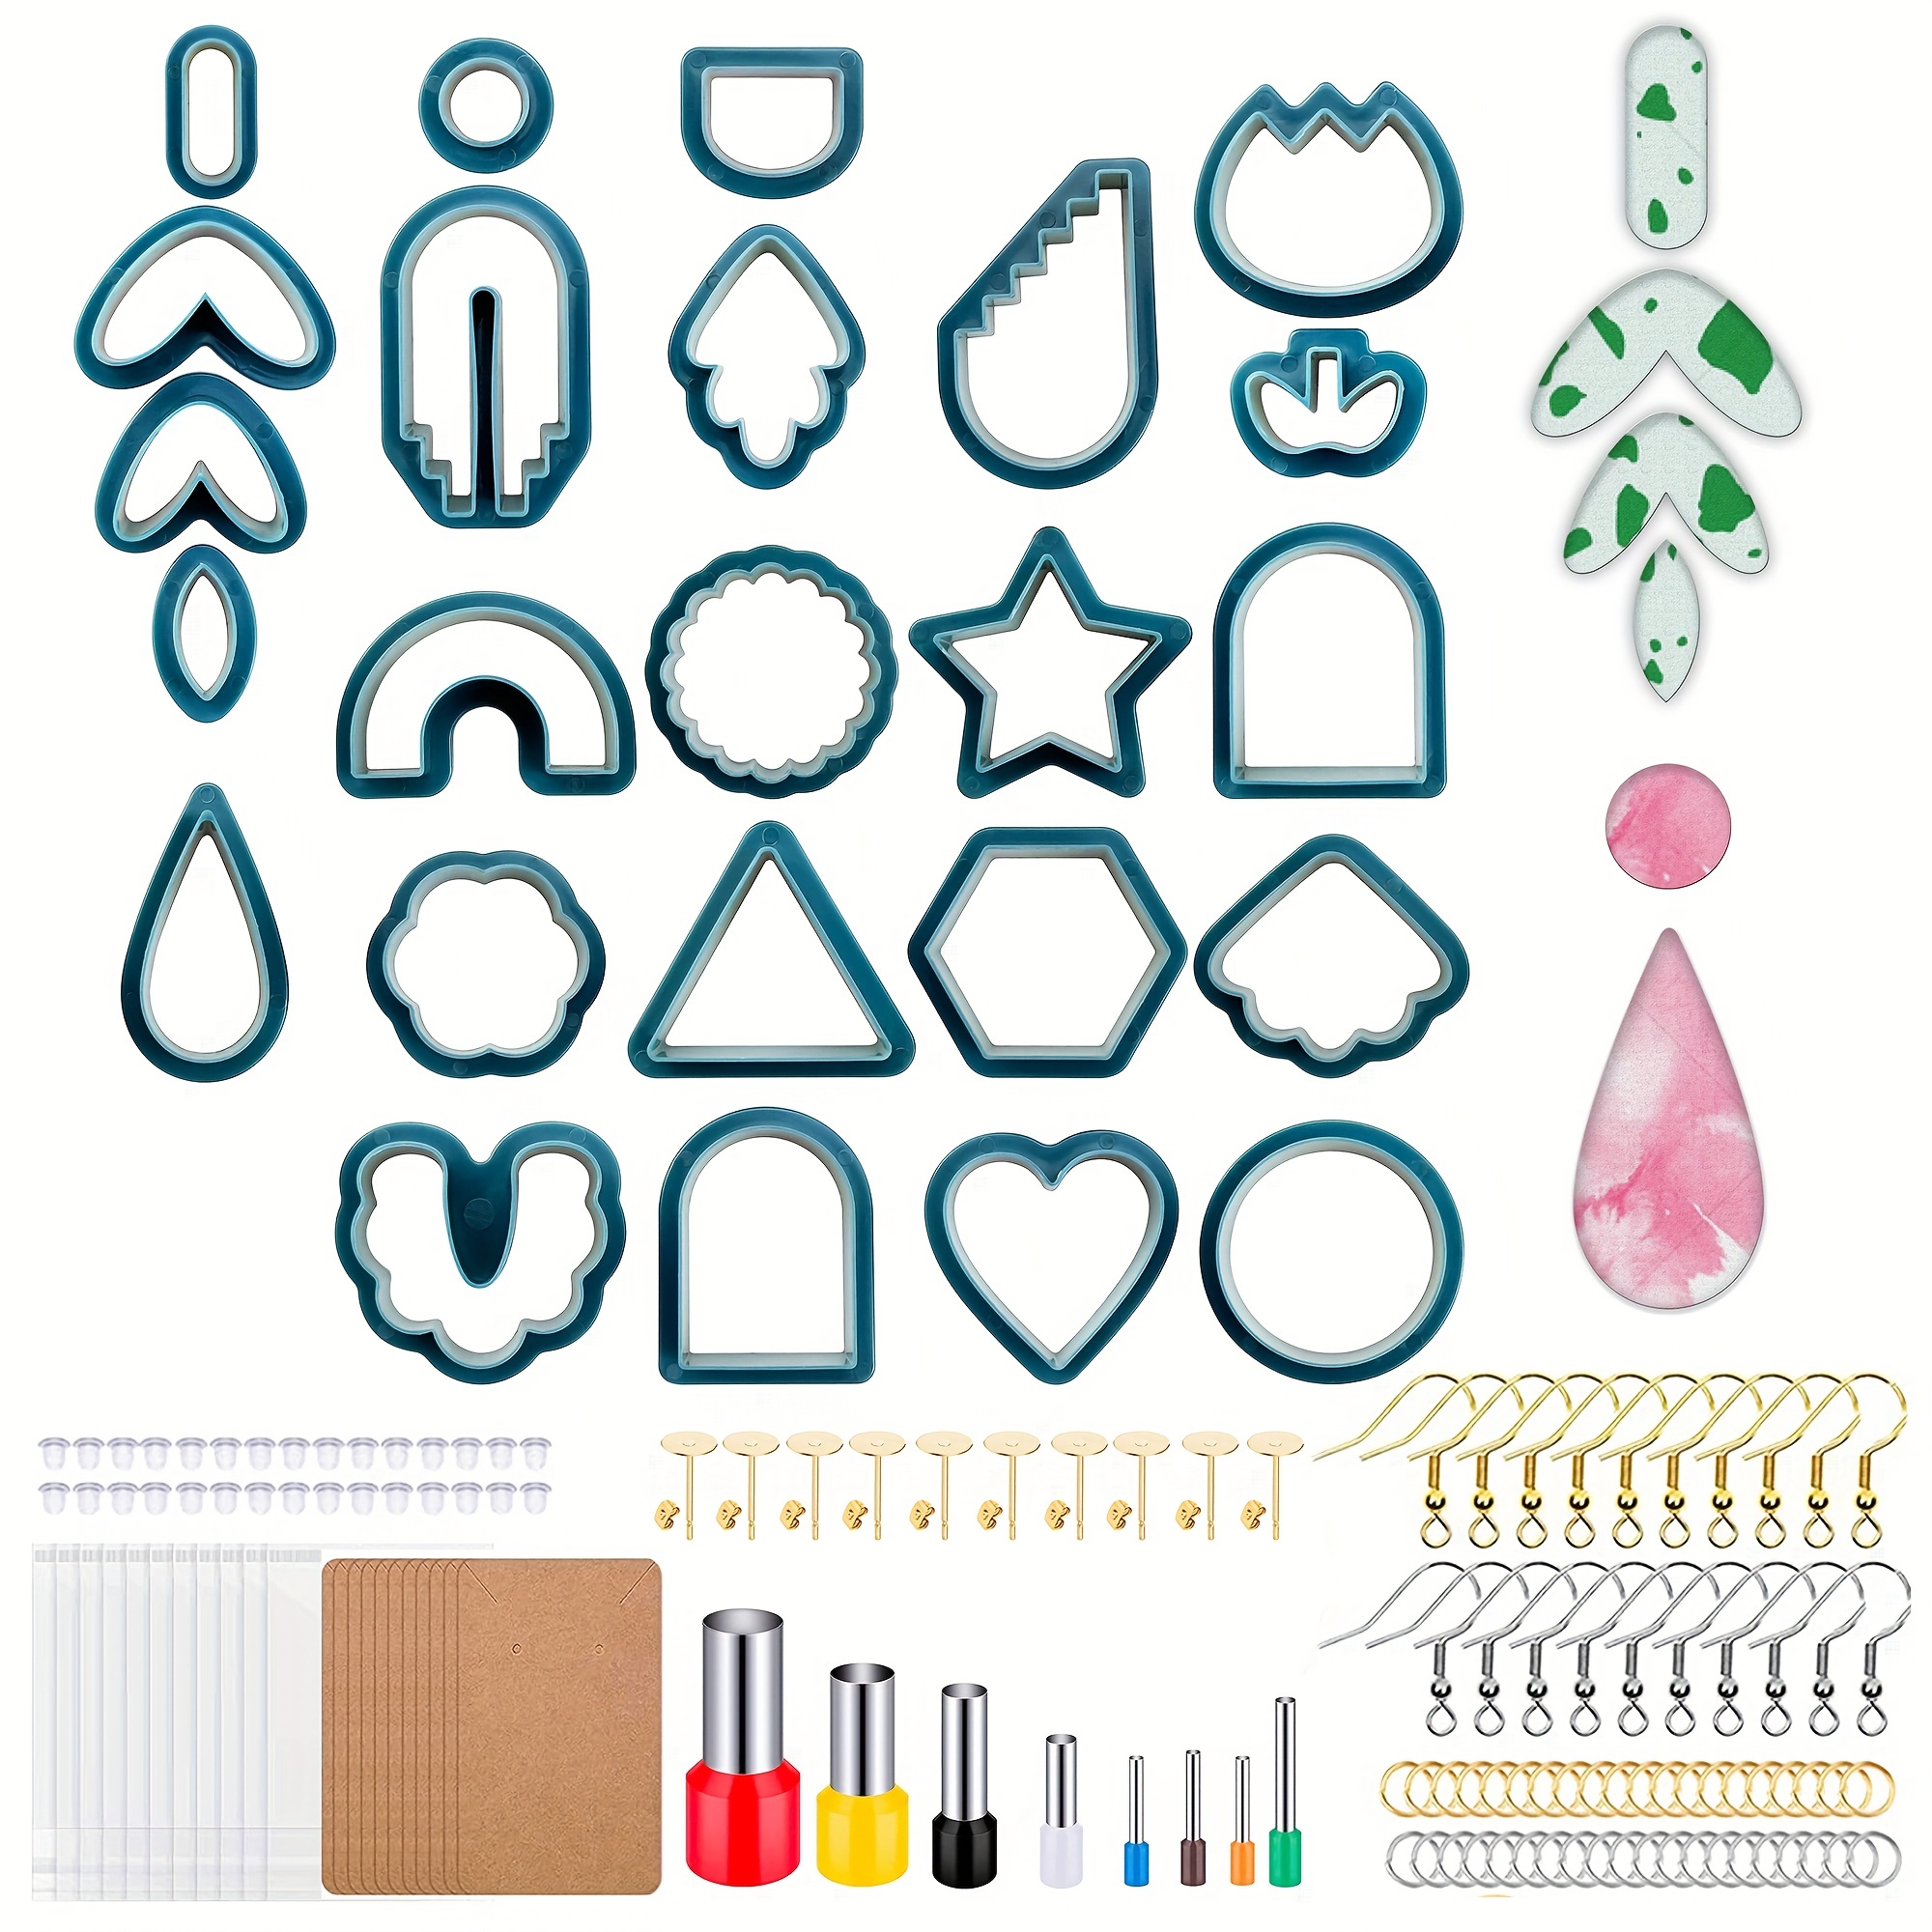 Polymer Clay Cutters, Earring Cutters Set of 142 Pieces, Polymer